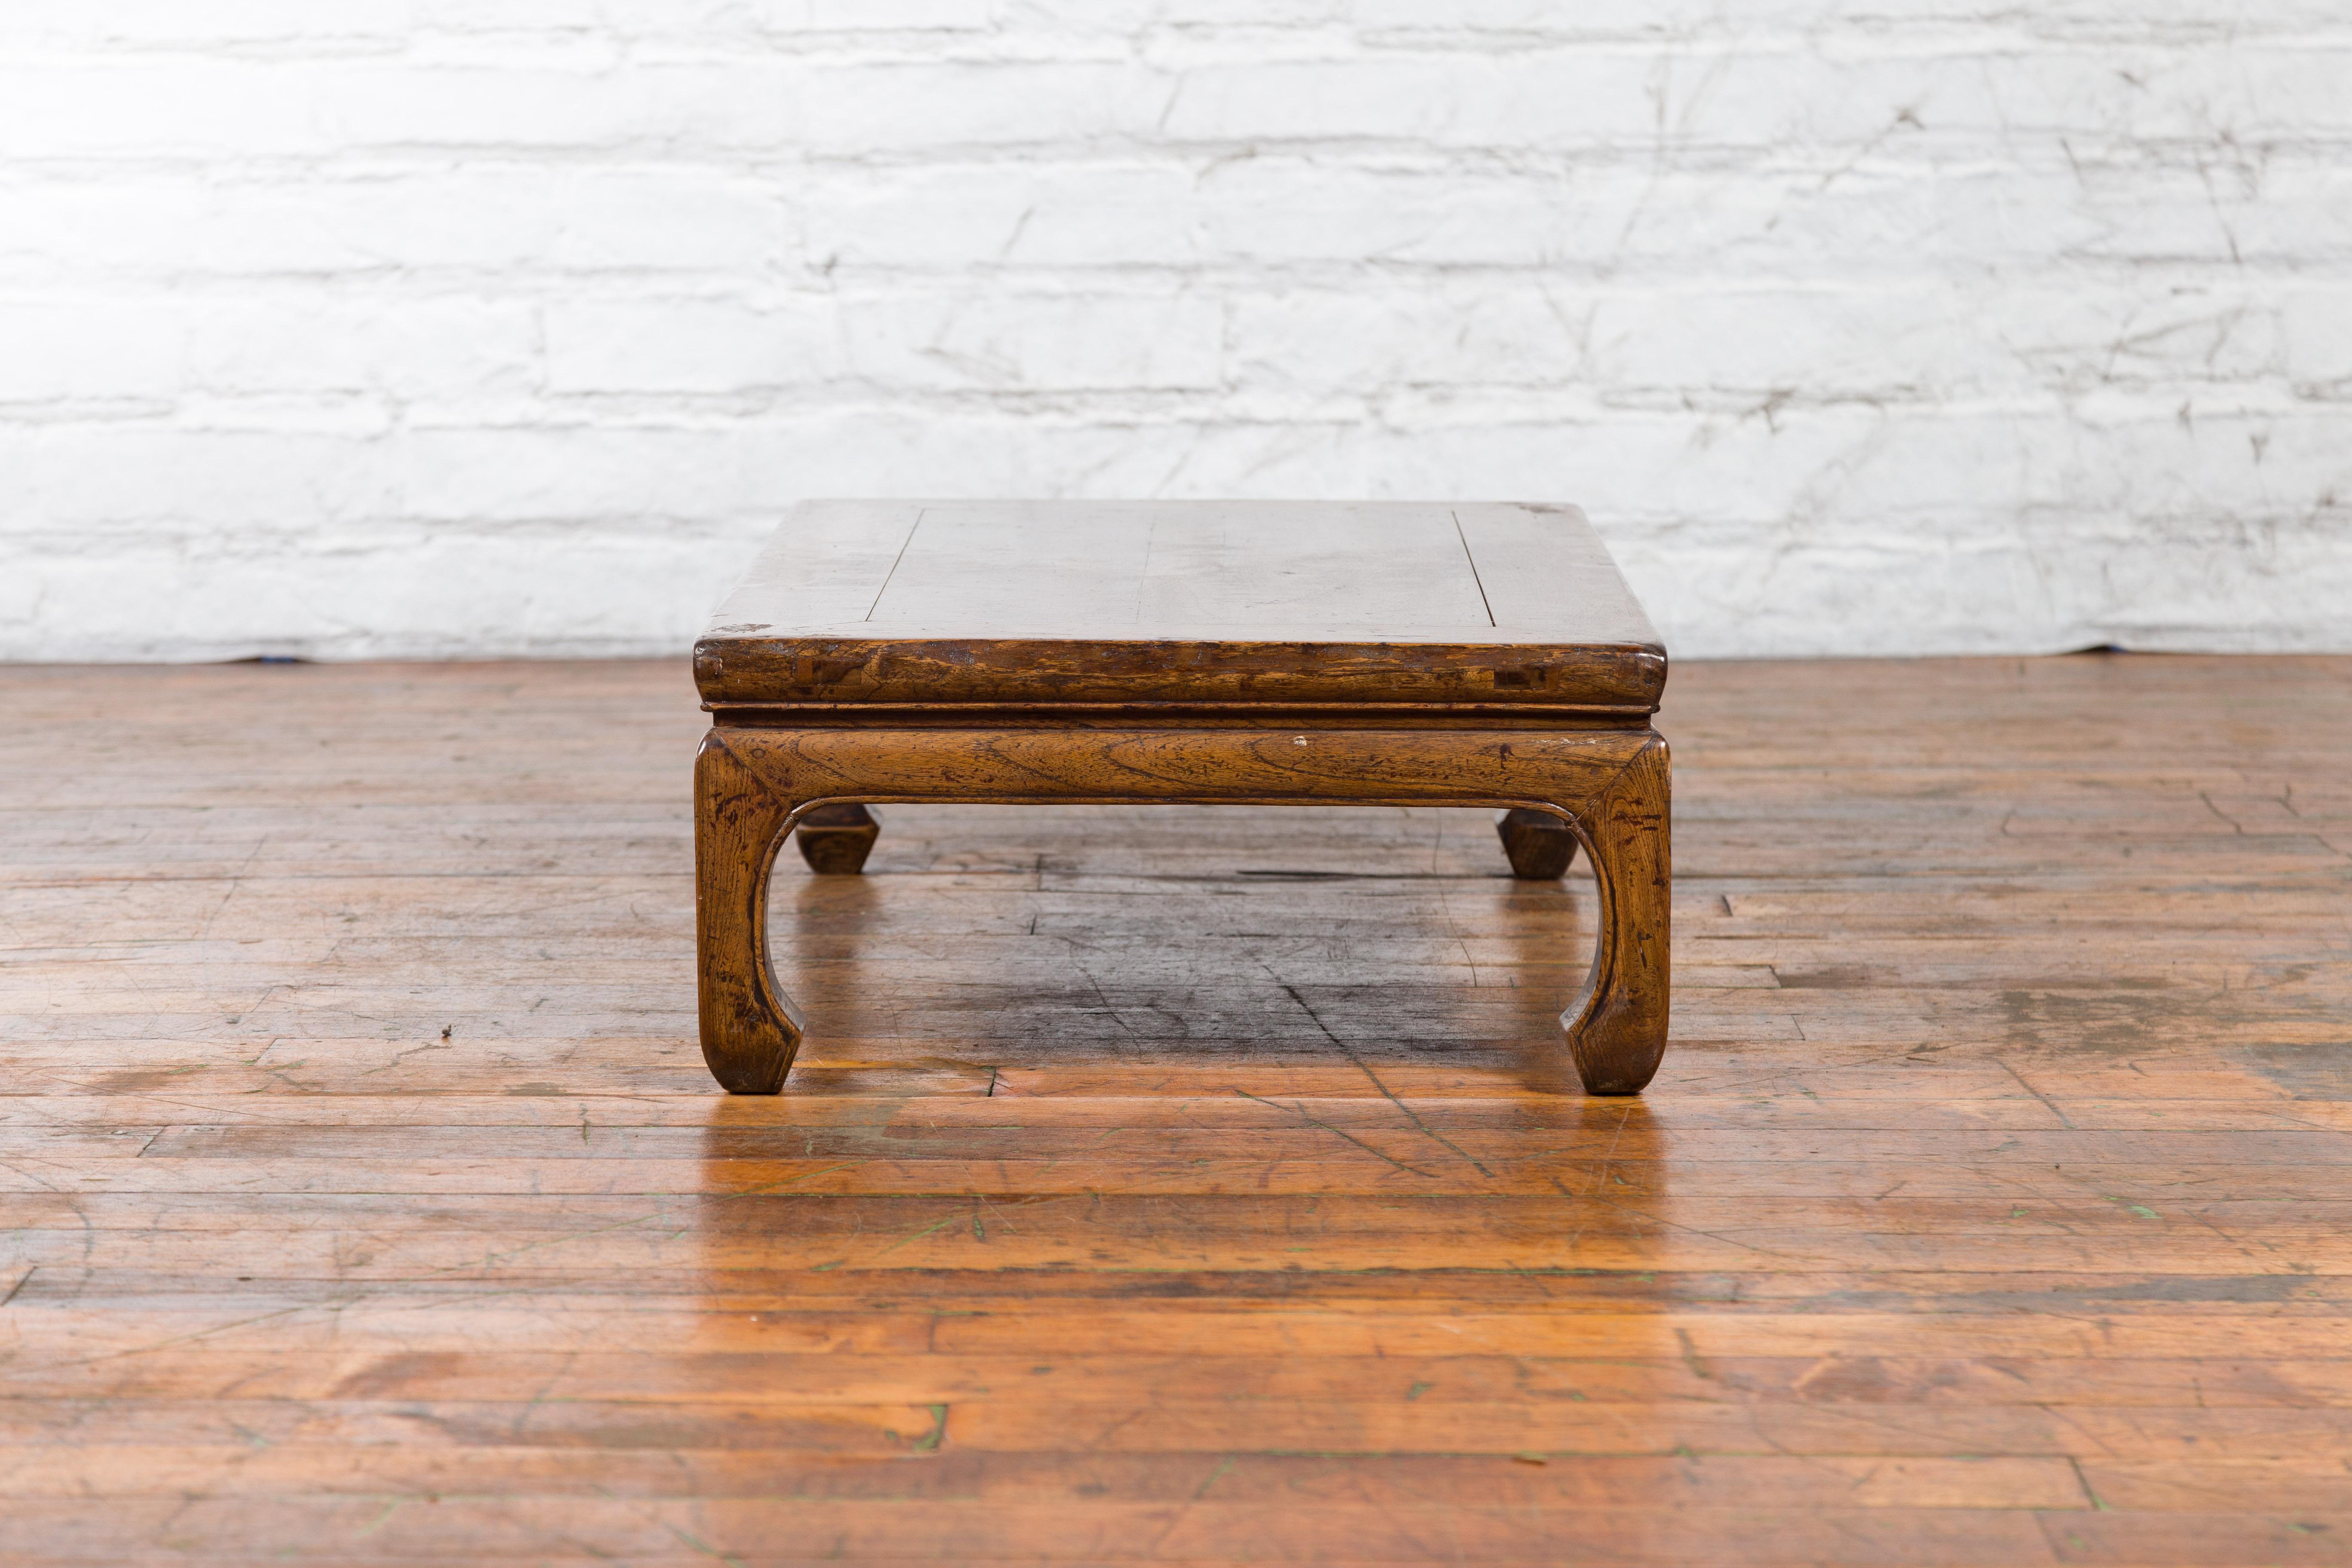 Chinese 19th Century Qing Dynasty Elm Kang Coffee Table with Horse Hoof Legs 5